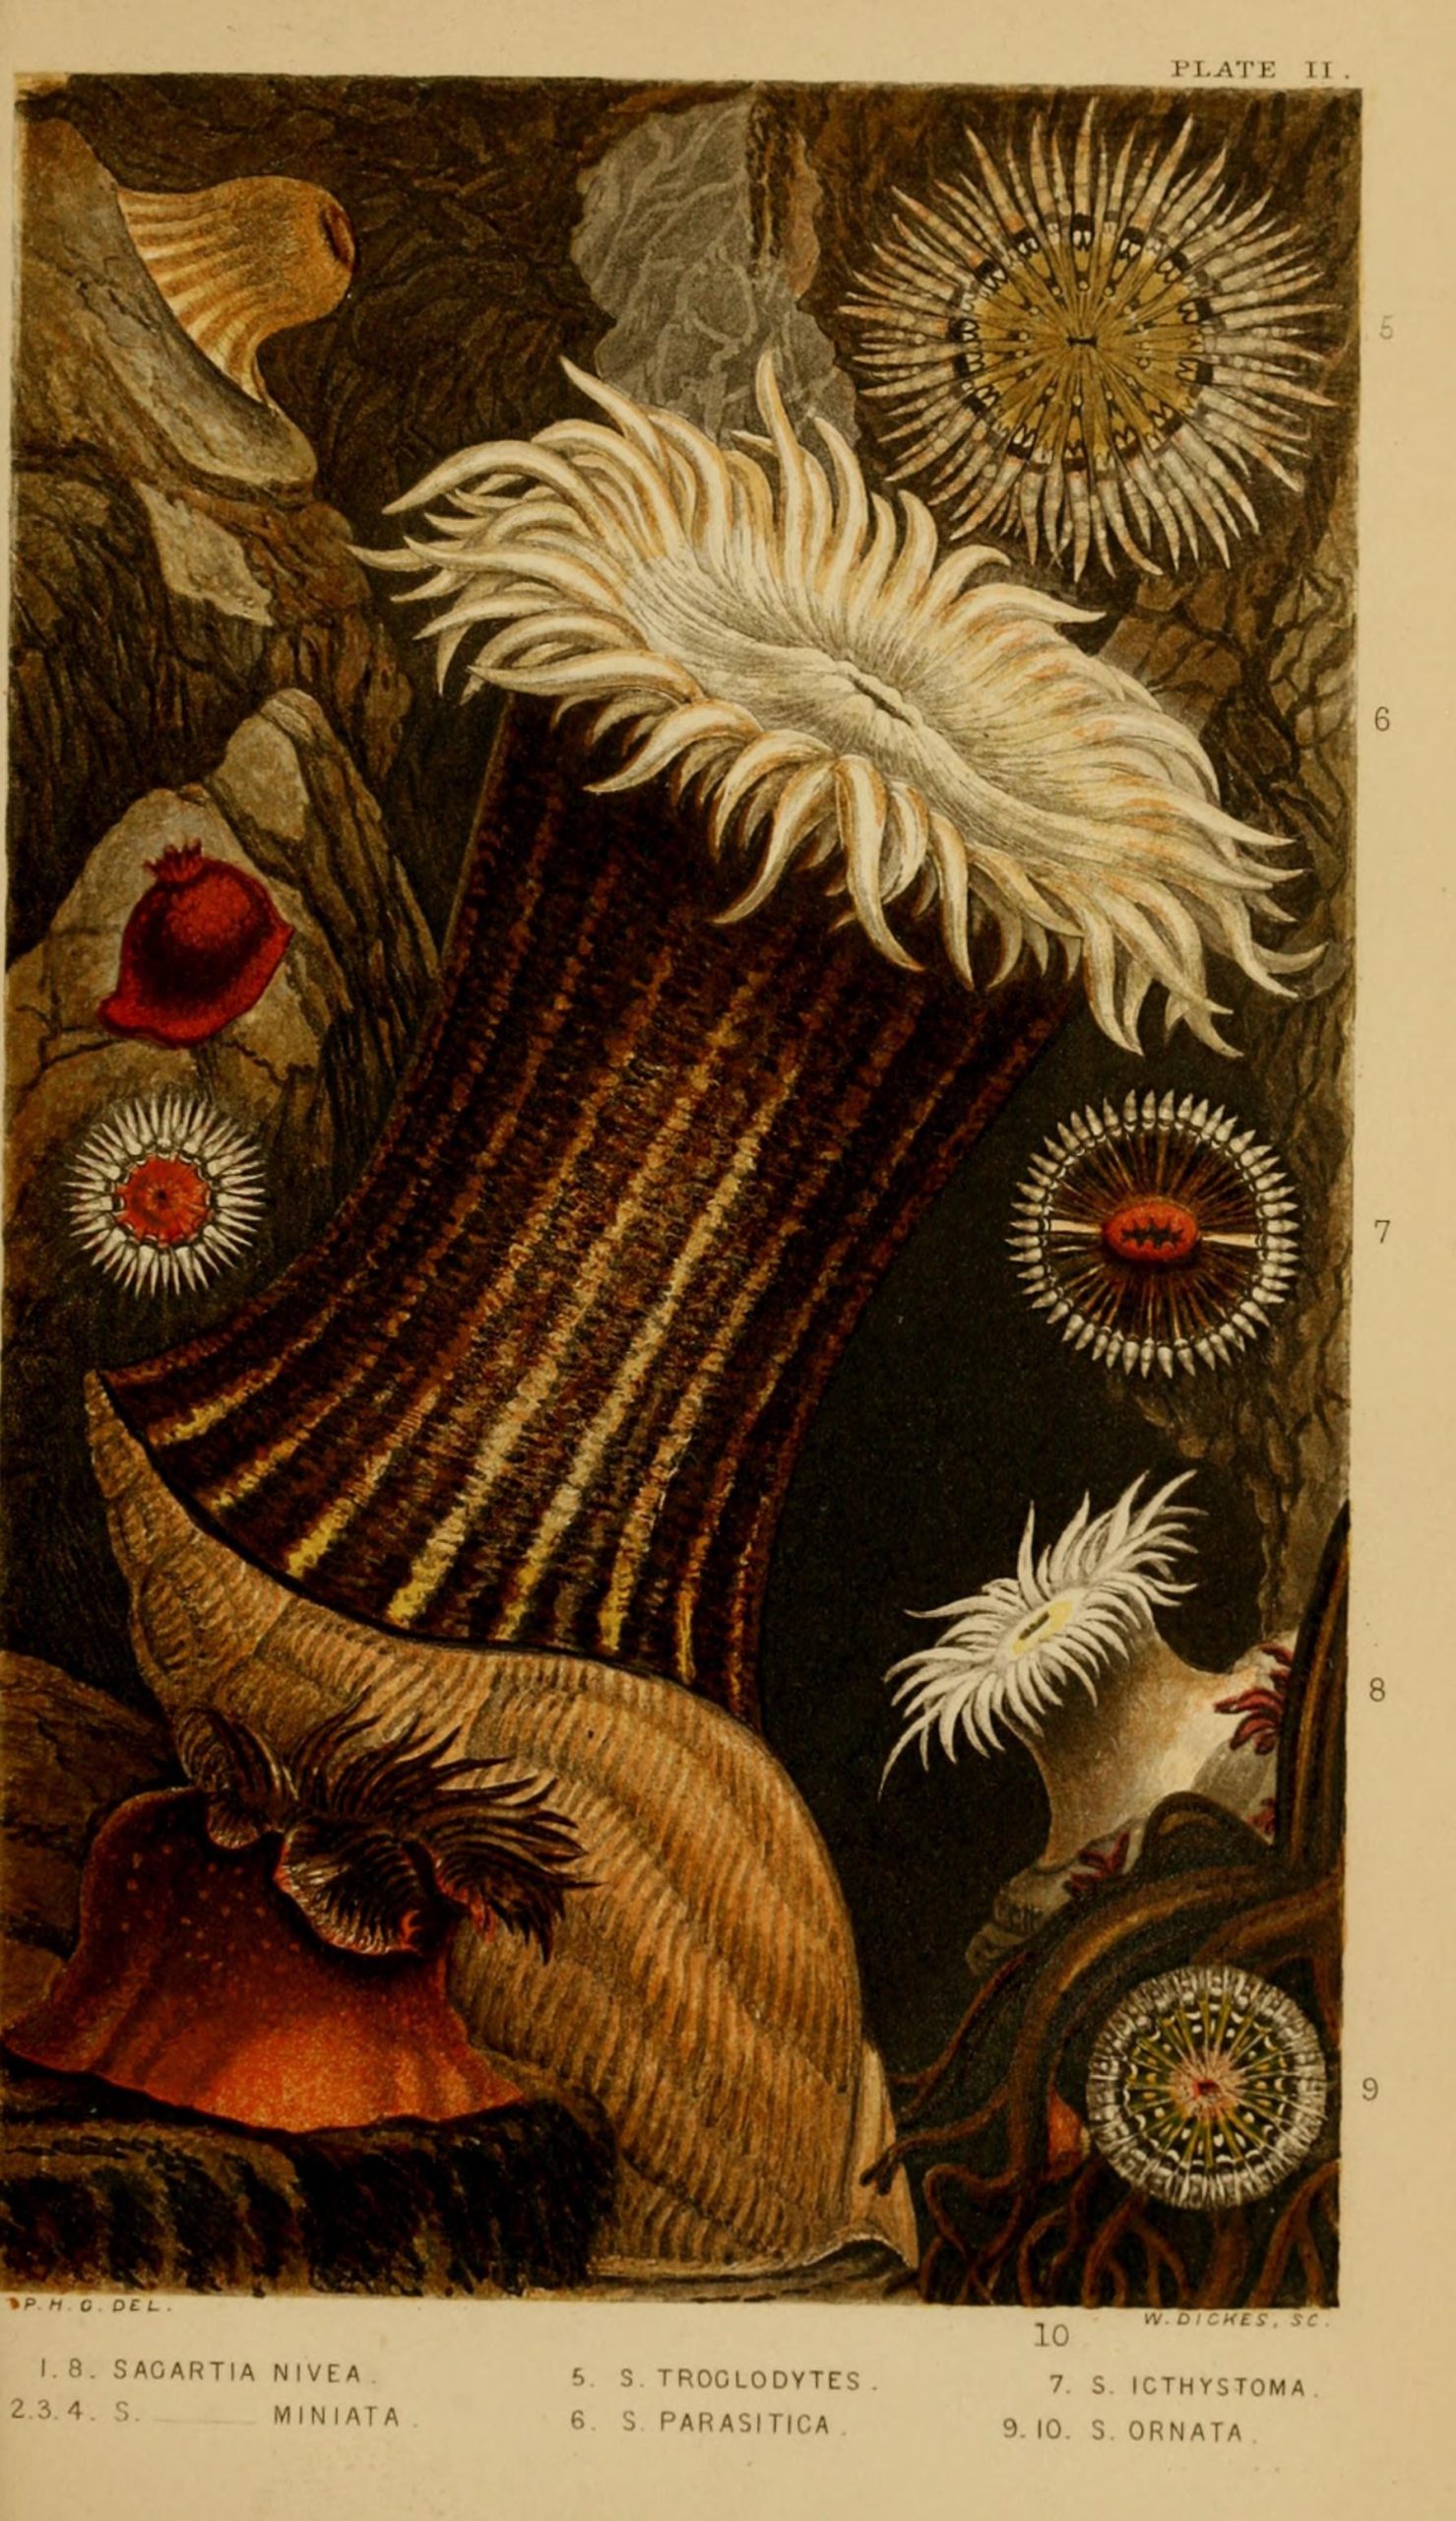 An illustration of various sea anemone and corals